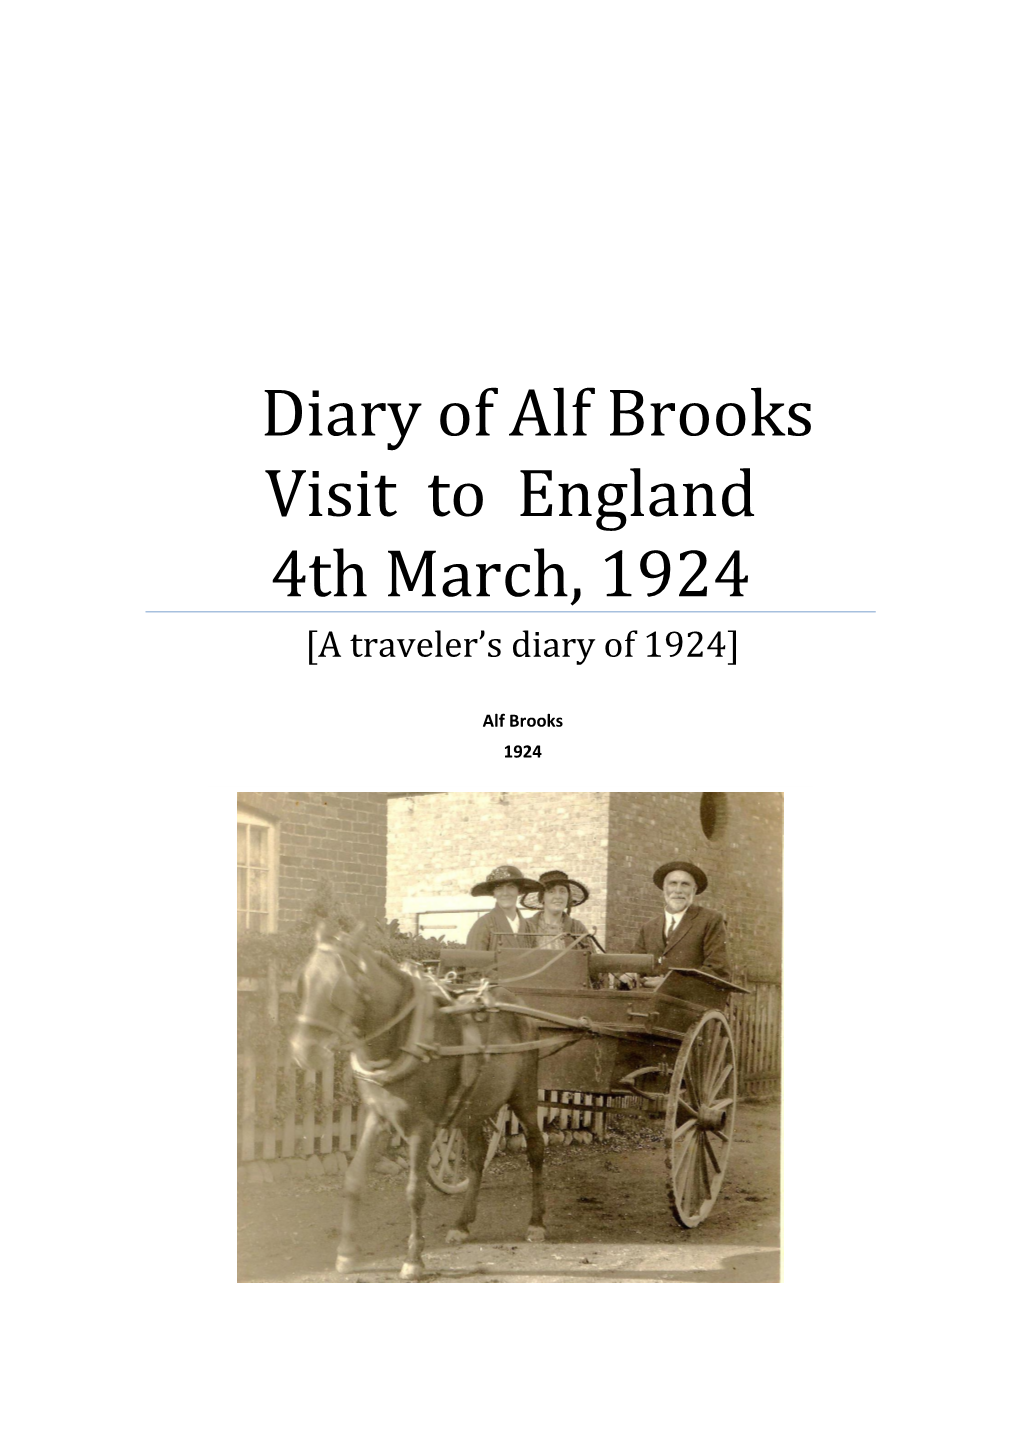 Diary of Alf Brooks of Kangaroo Valley Visit to England 4Th March, 1924